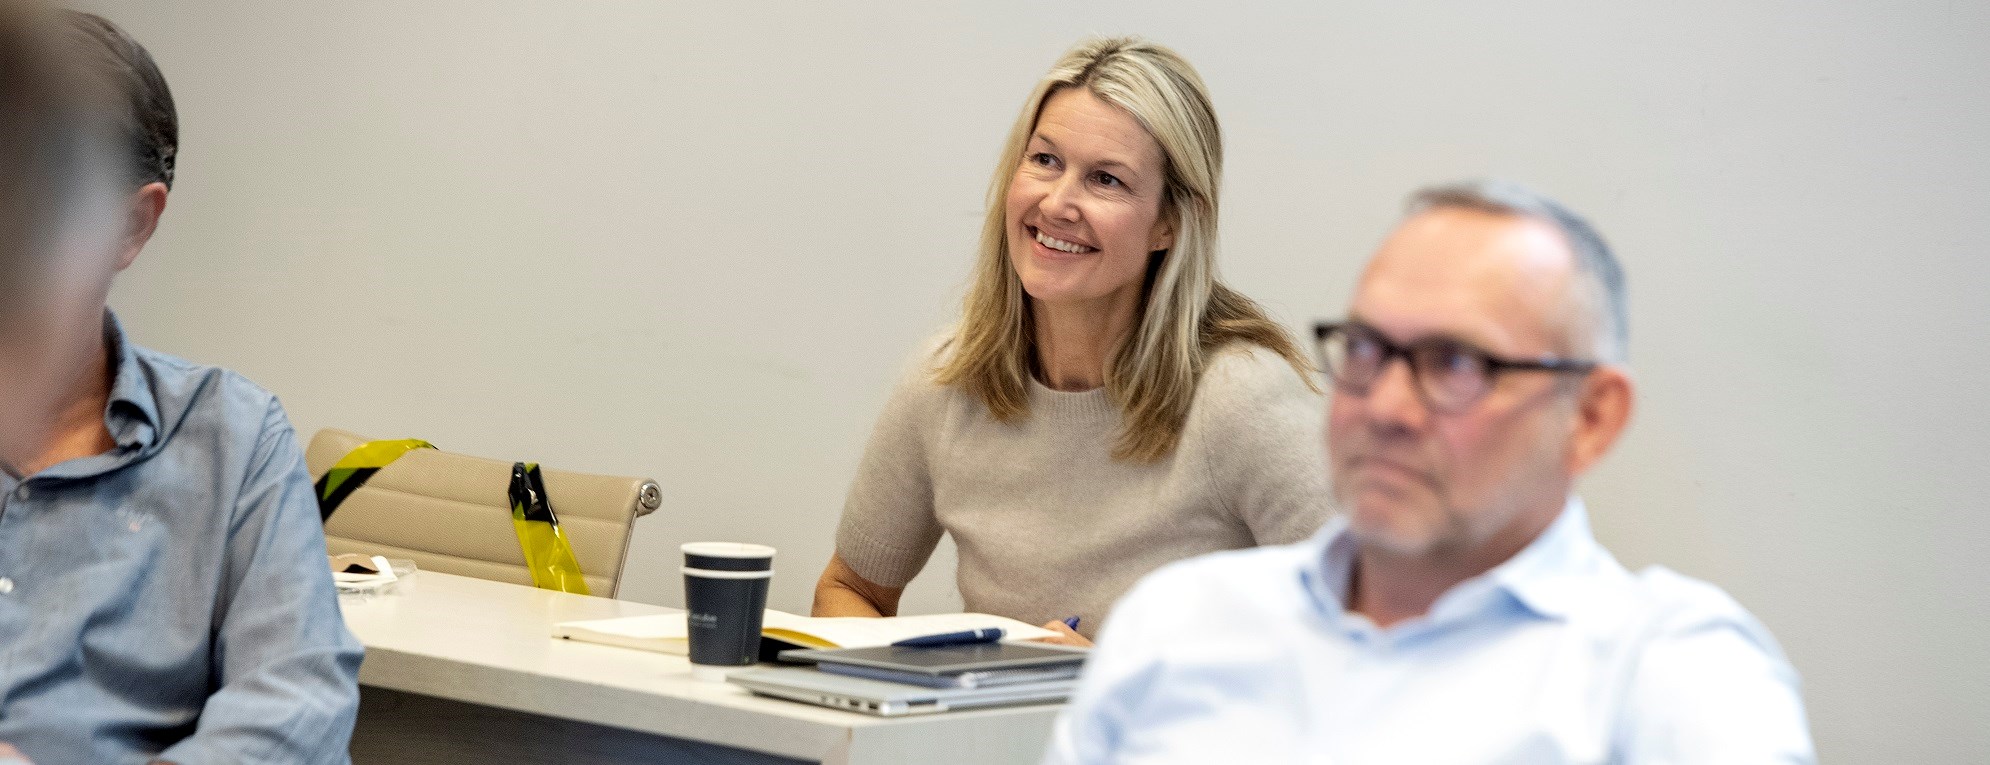 Pia Christine Helland is Senior Vice President of Ocean Industries in DNB, and a business graduate from NHH. She and Harald Rokke (from Nordic Investment Bank, at right) are students at NHHE´s programme Sustainable Business Strategy. Photo: Helge Skodvin